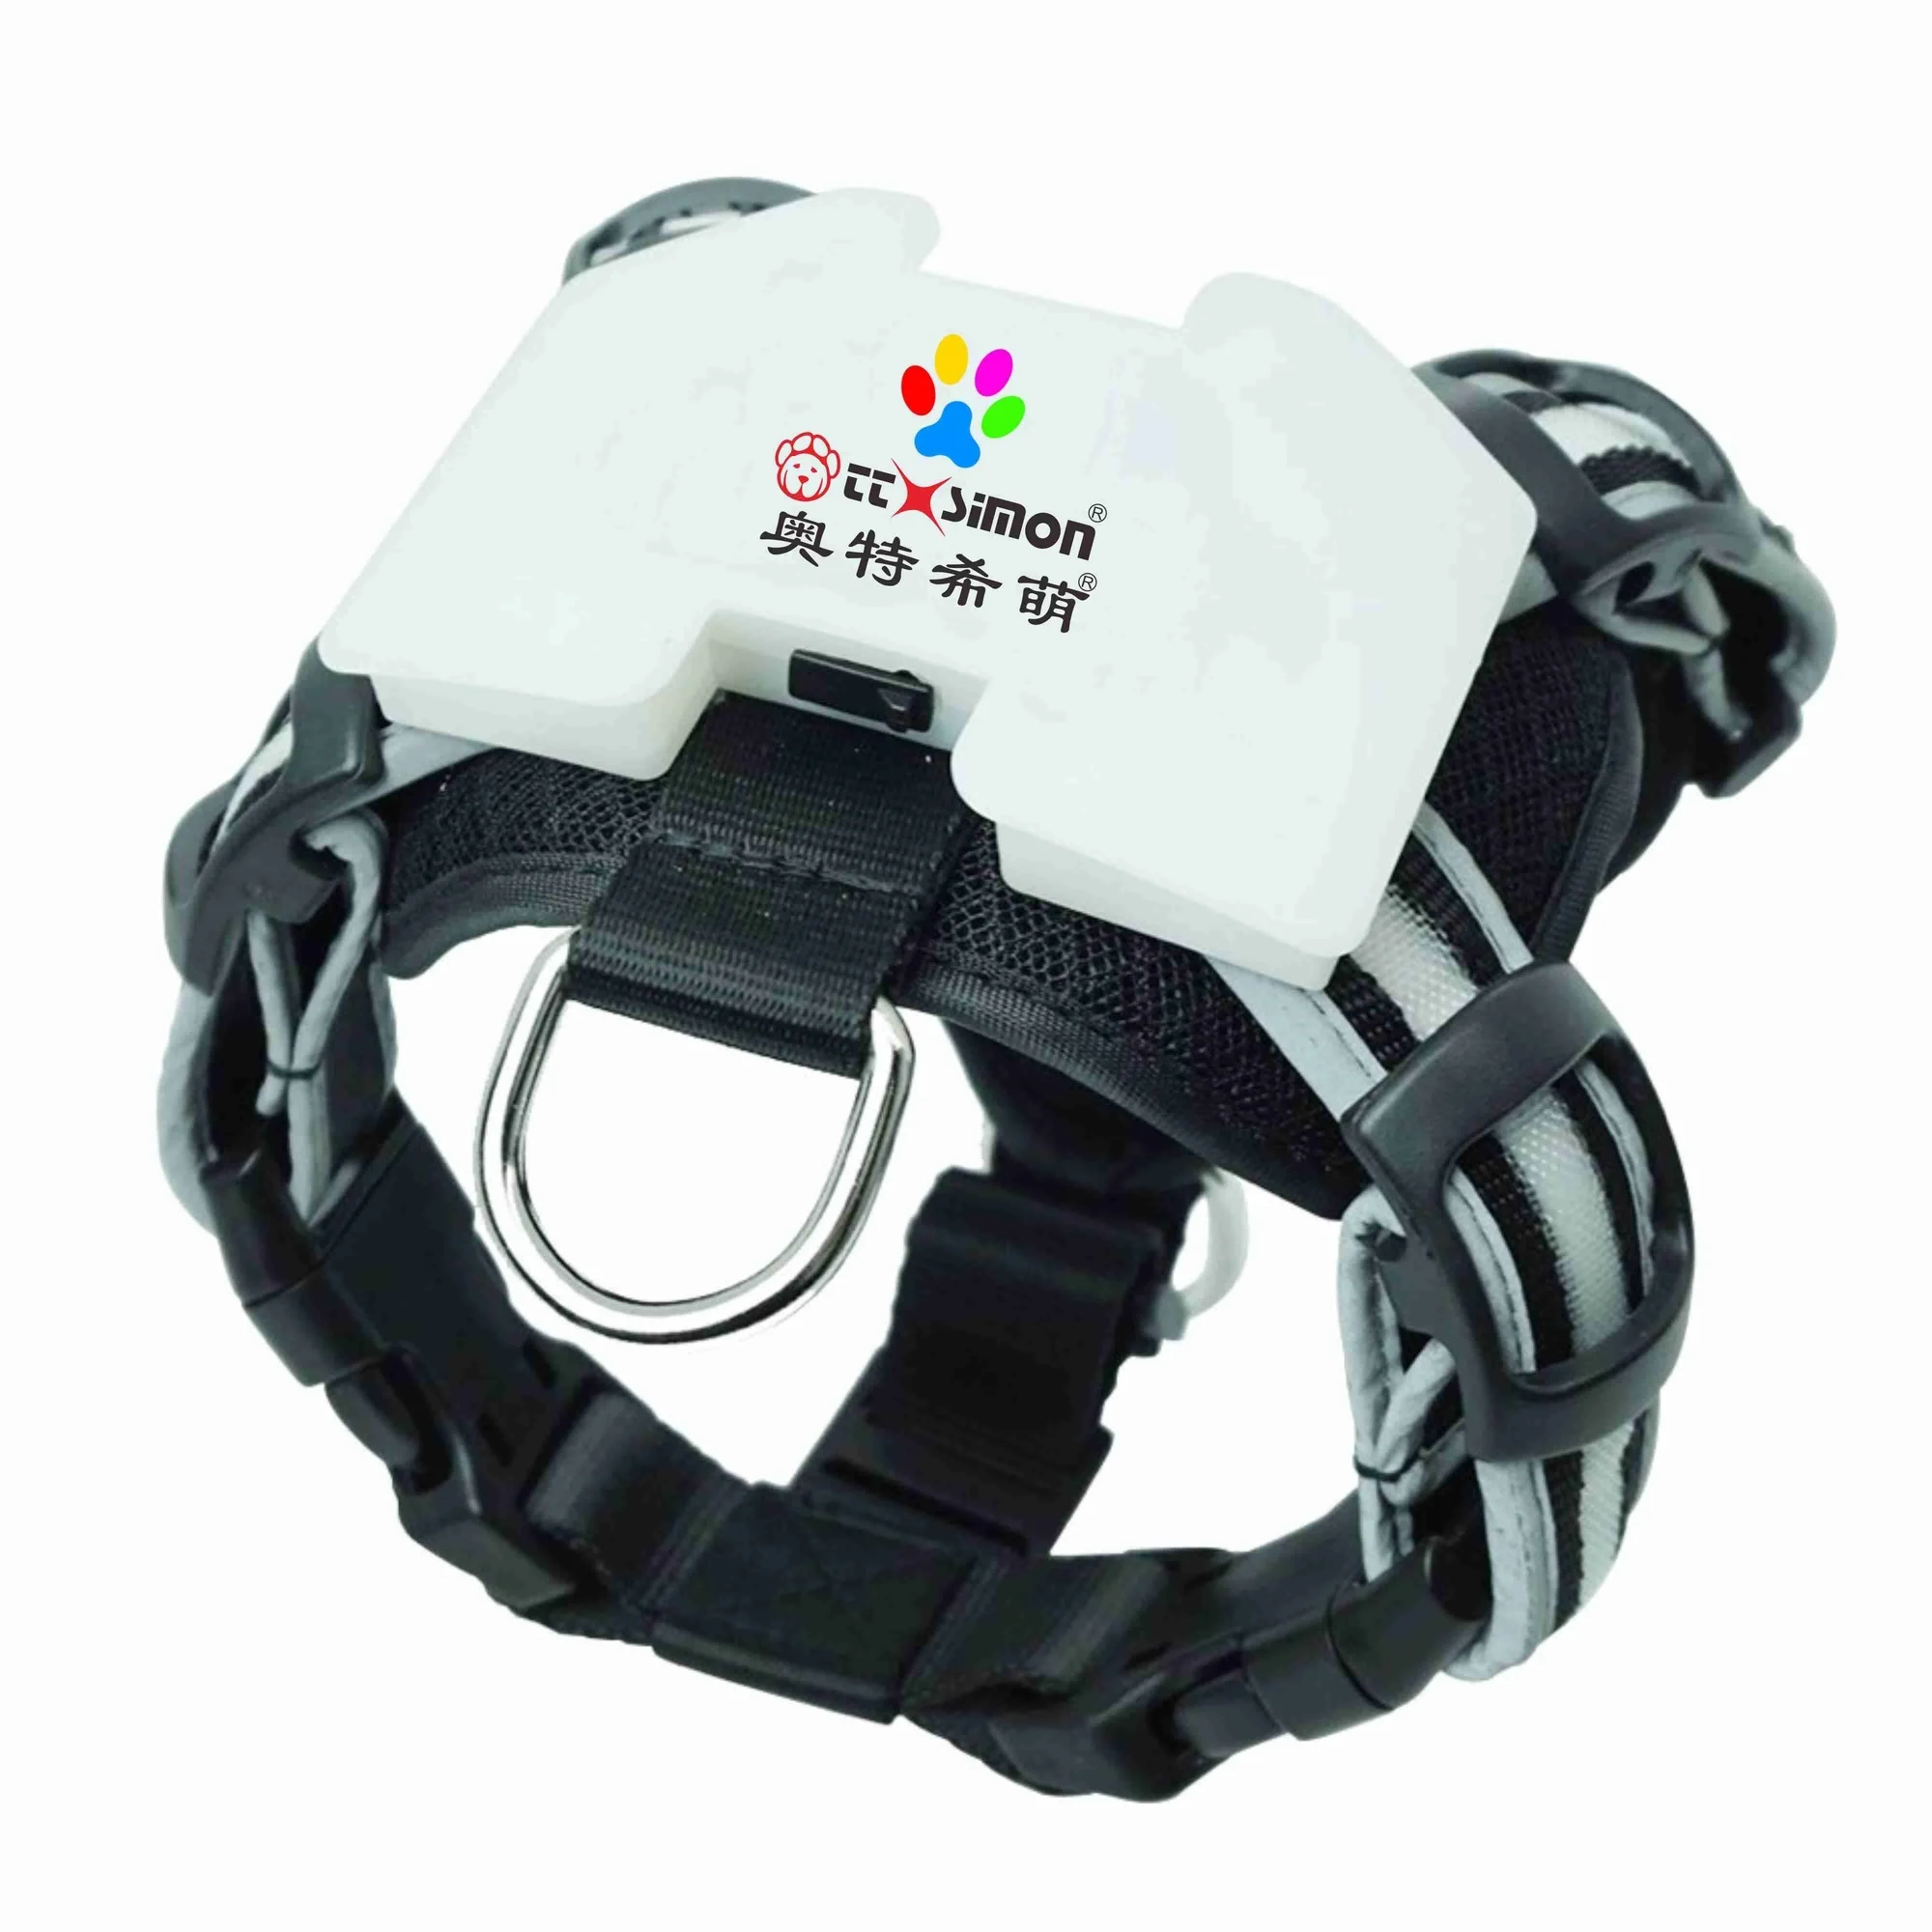 

collar with dog led light cc cimon Polyester Dog Harness And Leash